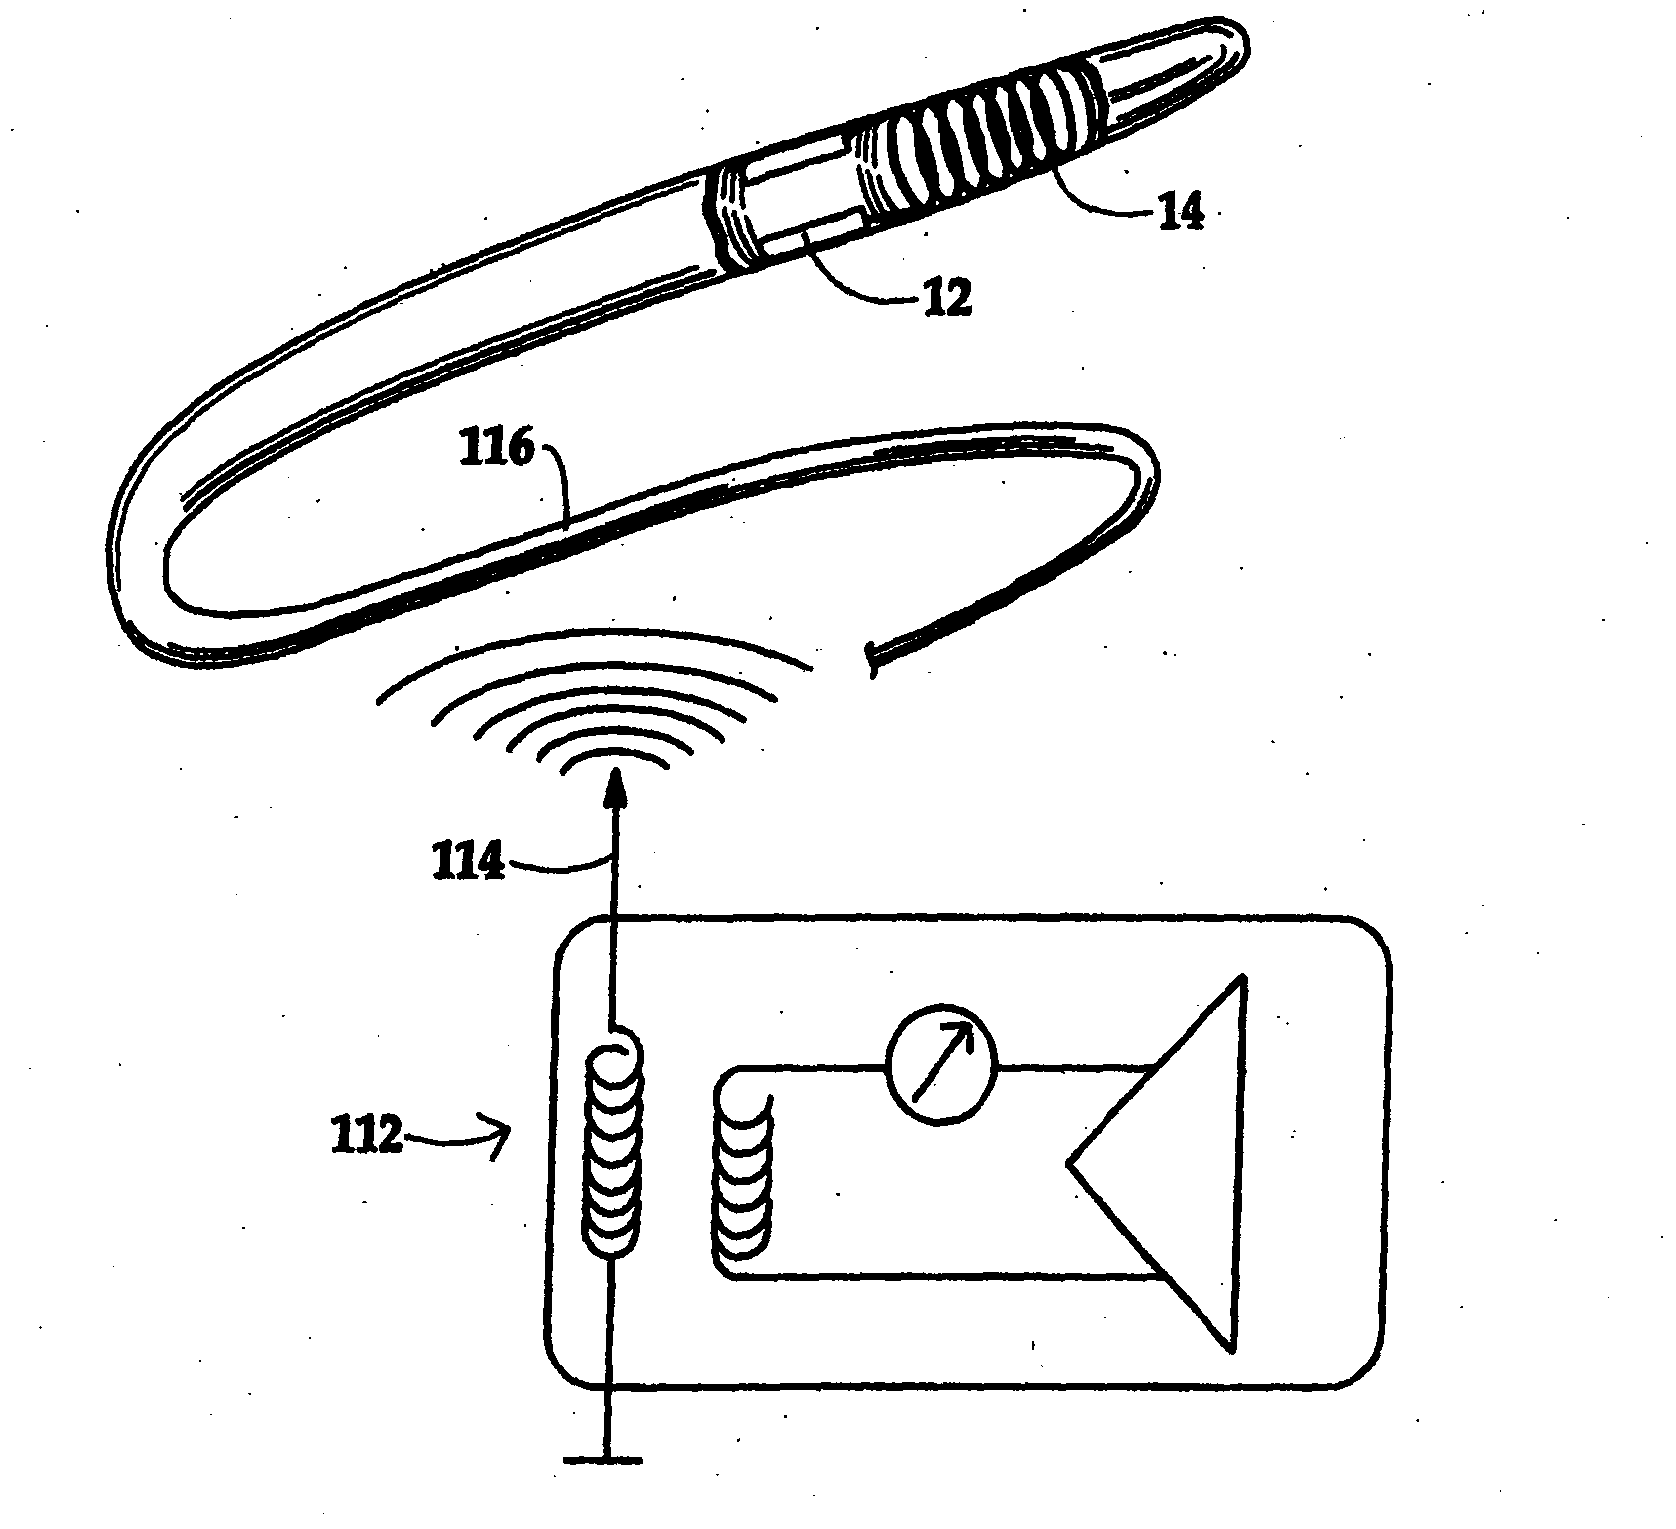 System including guidewire for detecting fluid pressure